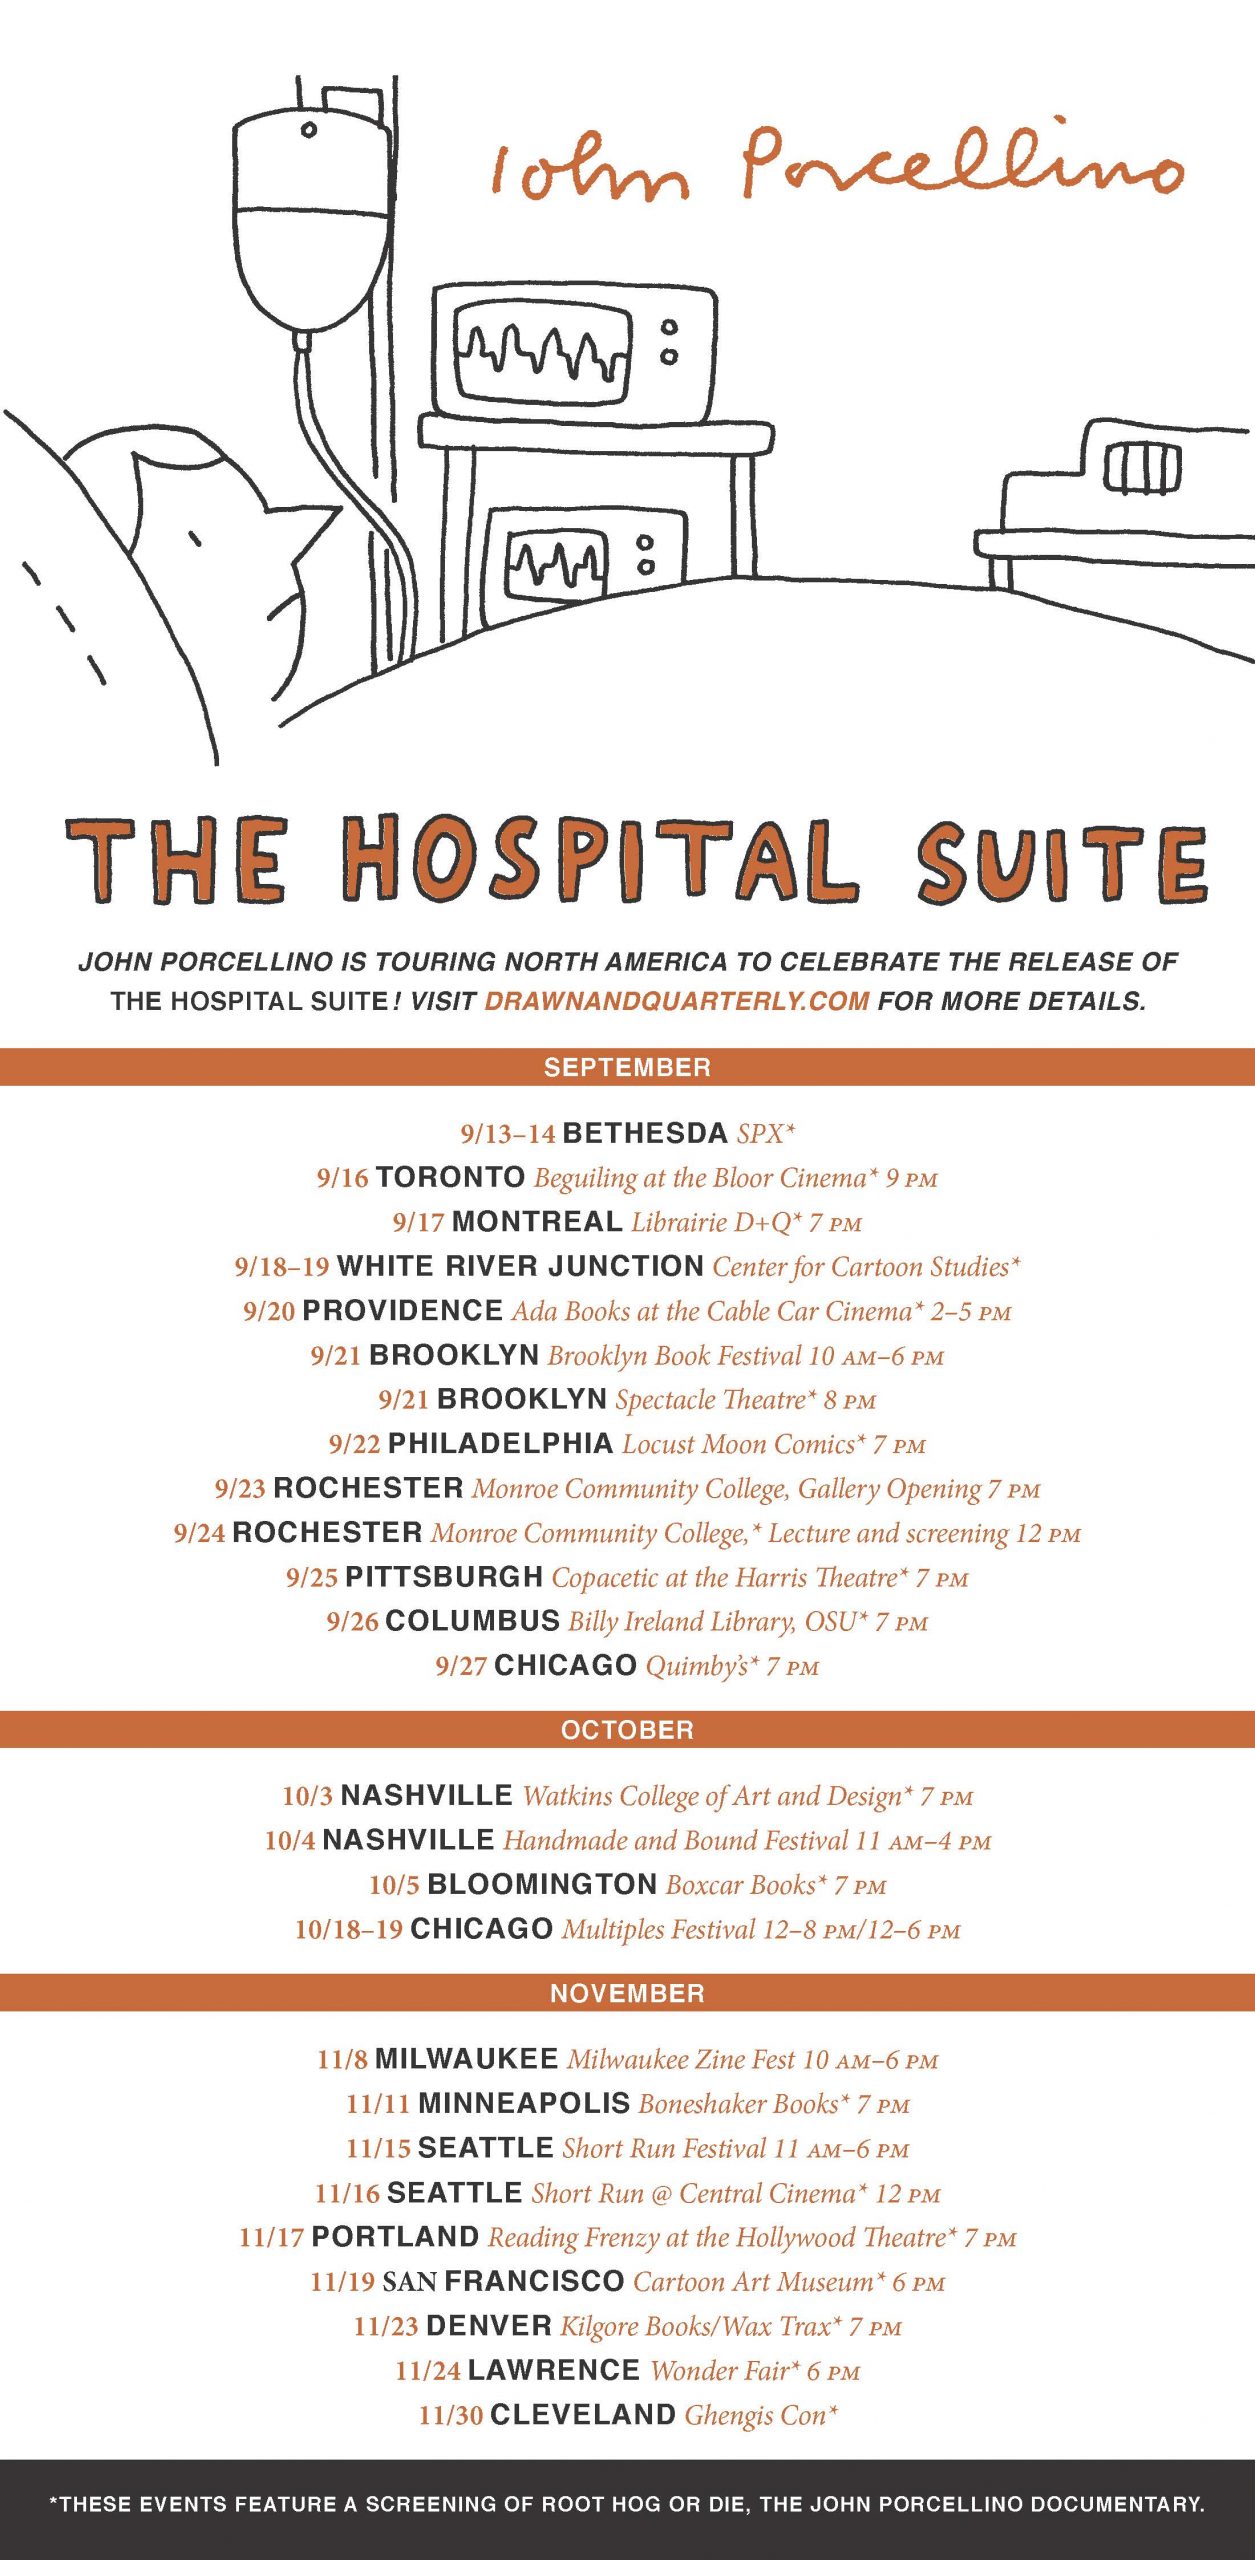 John Porcellino on tour for The Hospital Suite! – Drawn & Quarterly